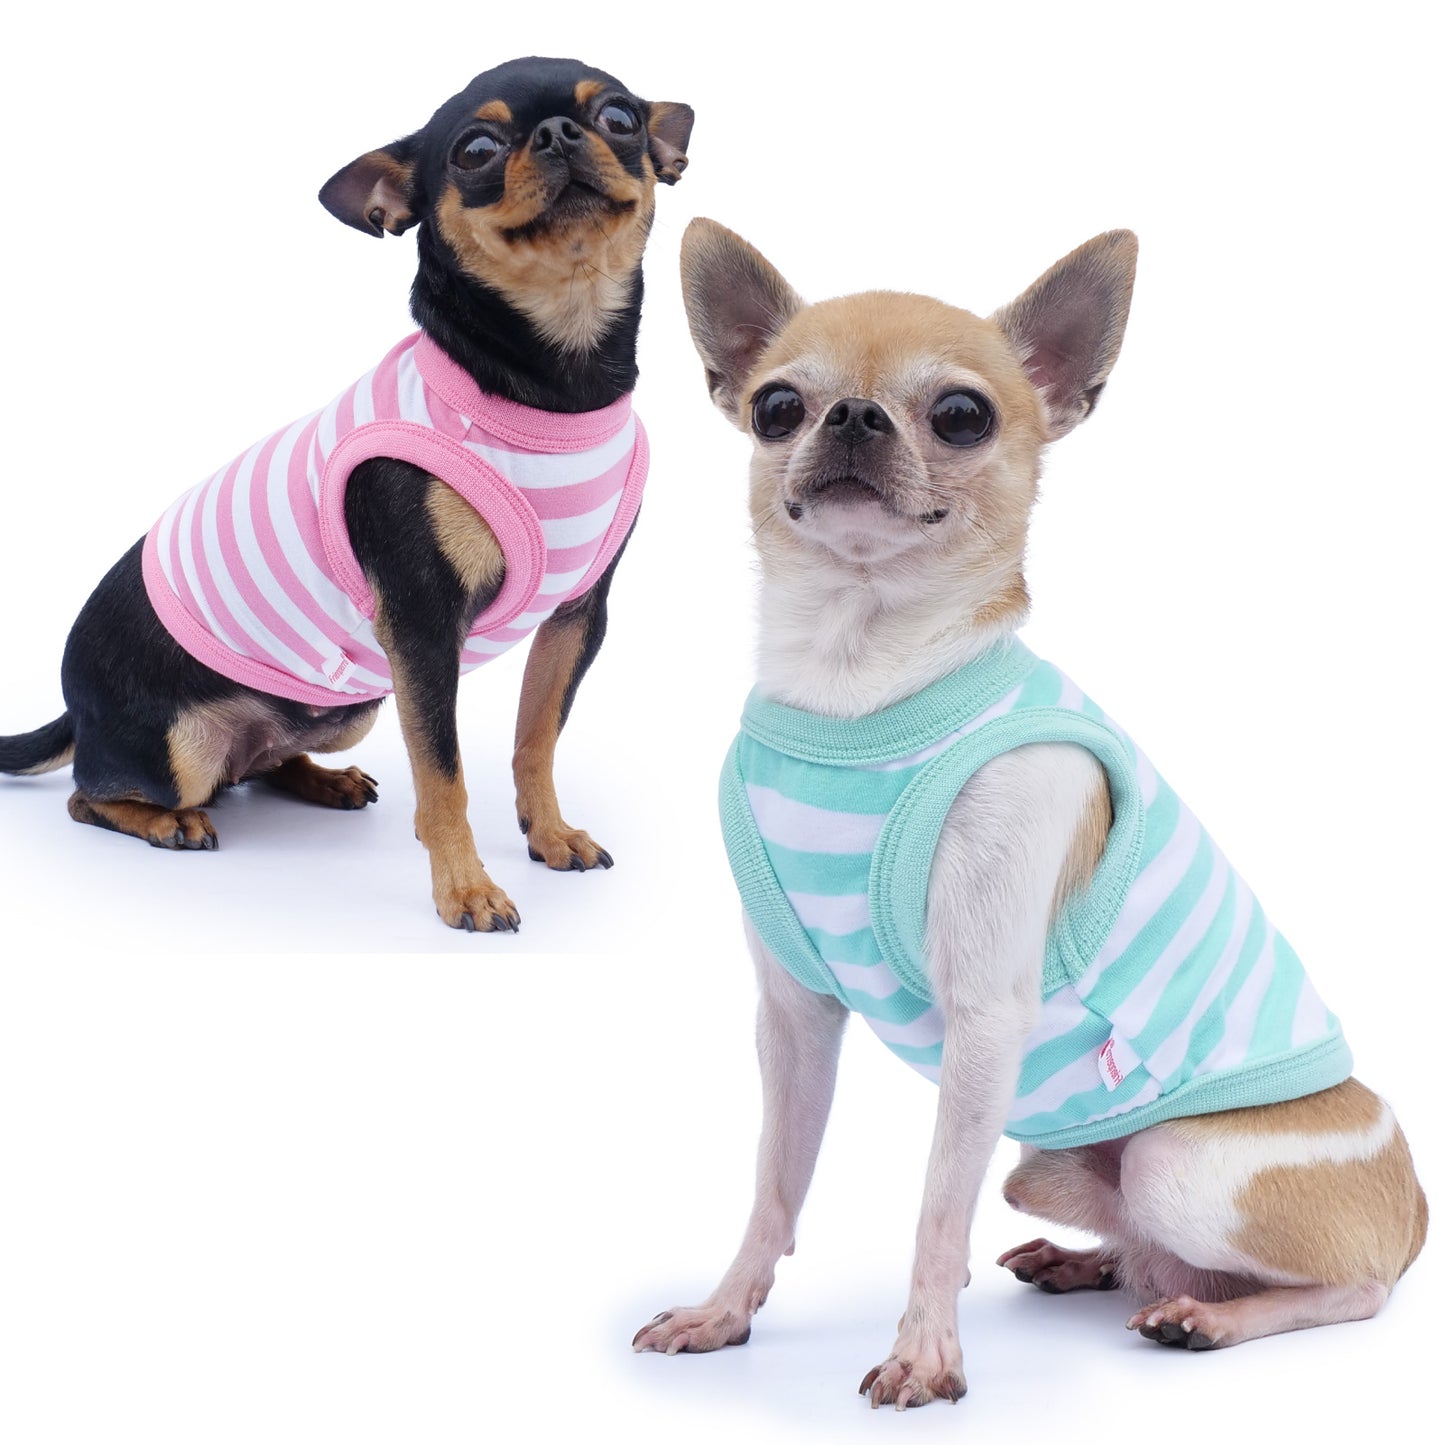 Frienperro 2-Pack Striped Dog Clothes